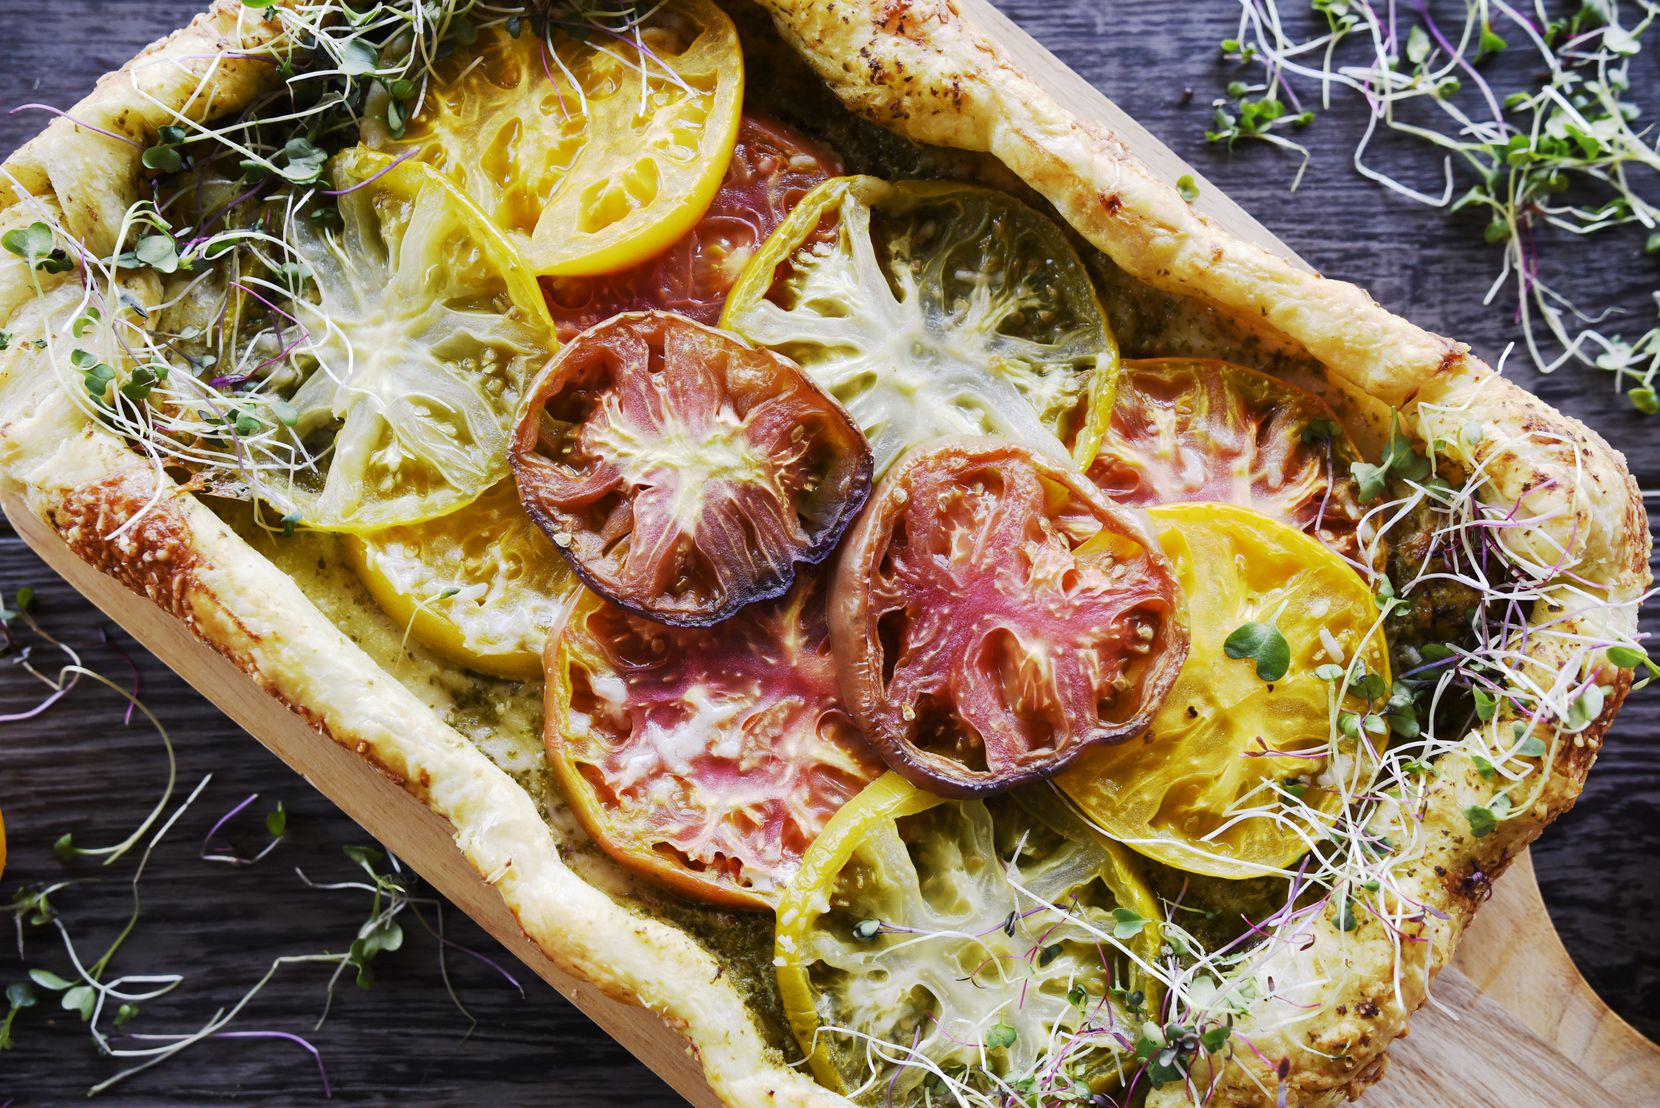 Heirloom tomato tart, from Kristen Massad at her home in Dallas, March 11, 2020. Ben Torres/Special Contributor